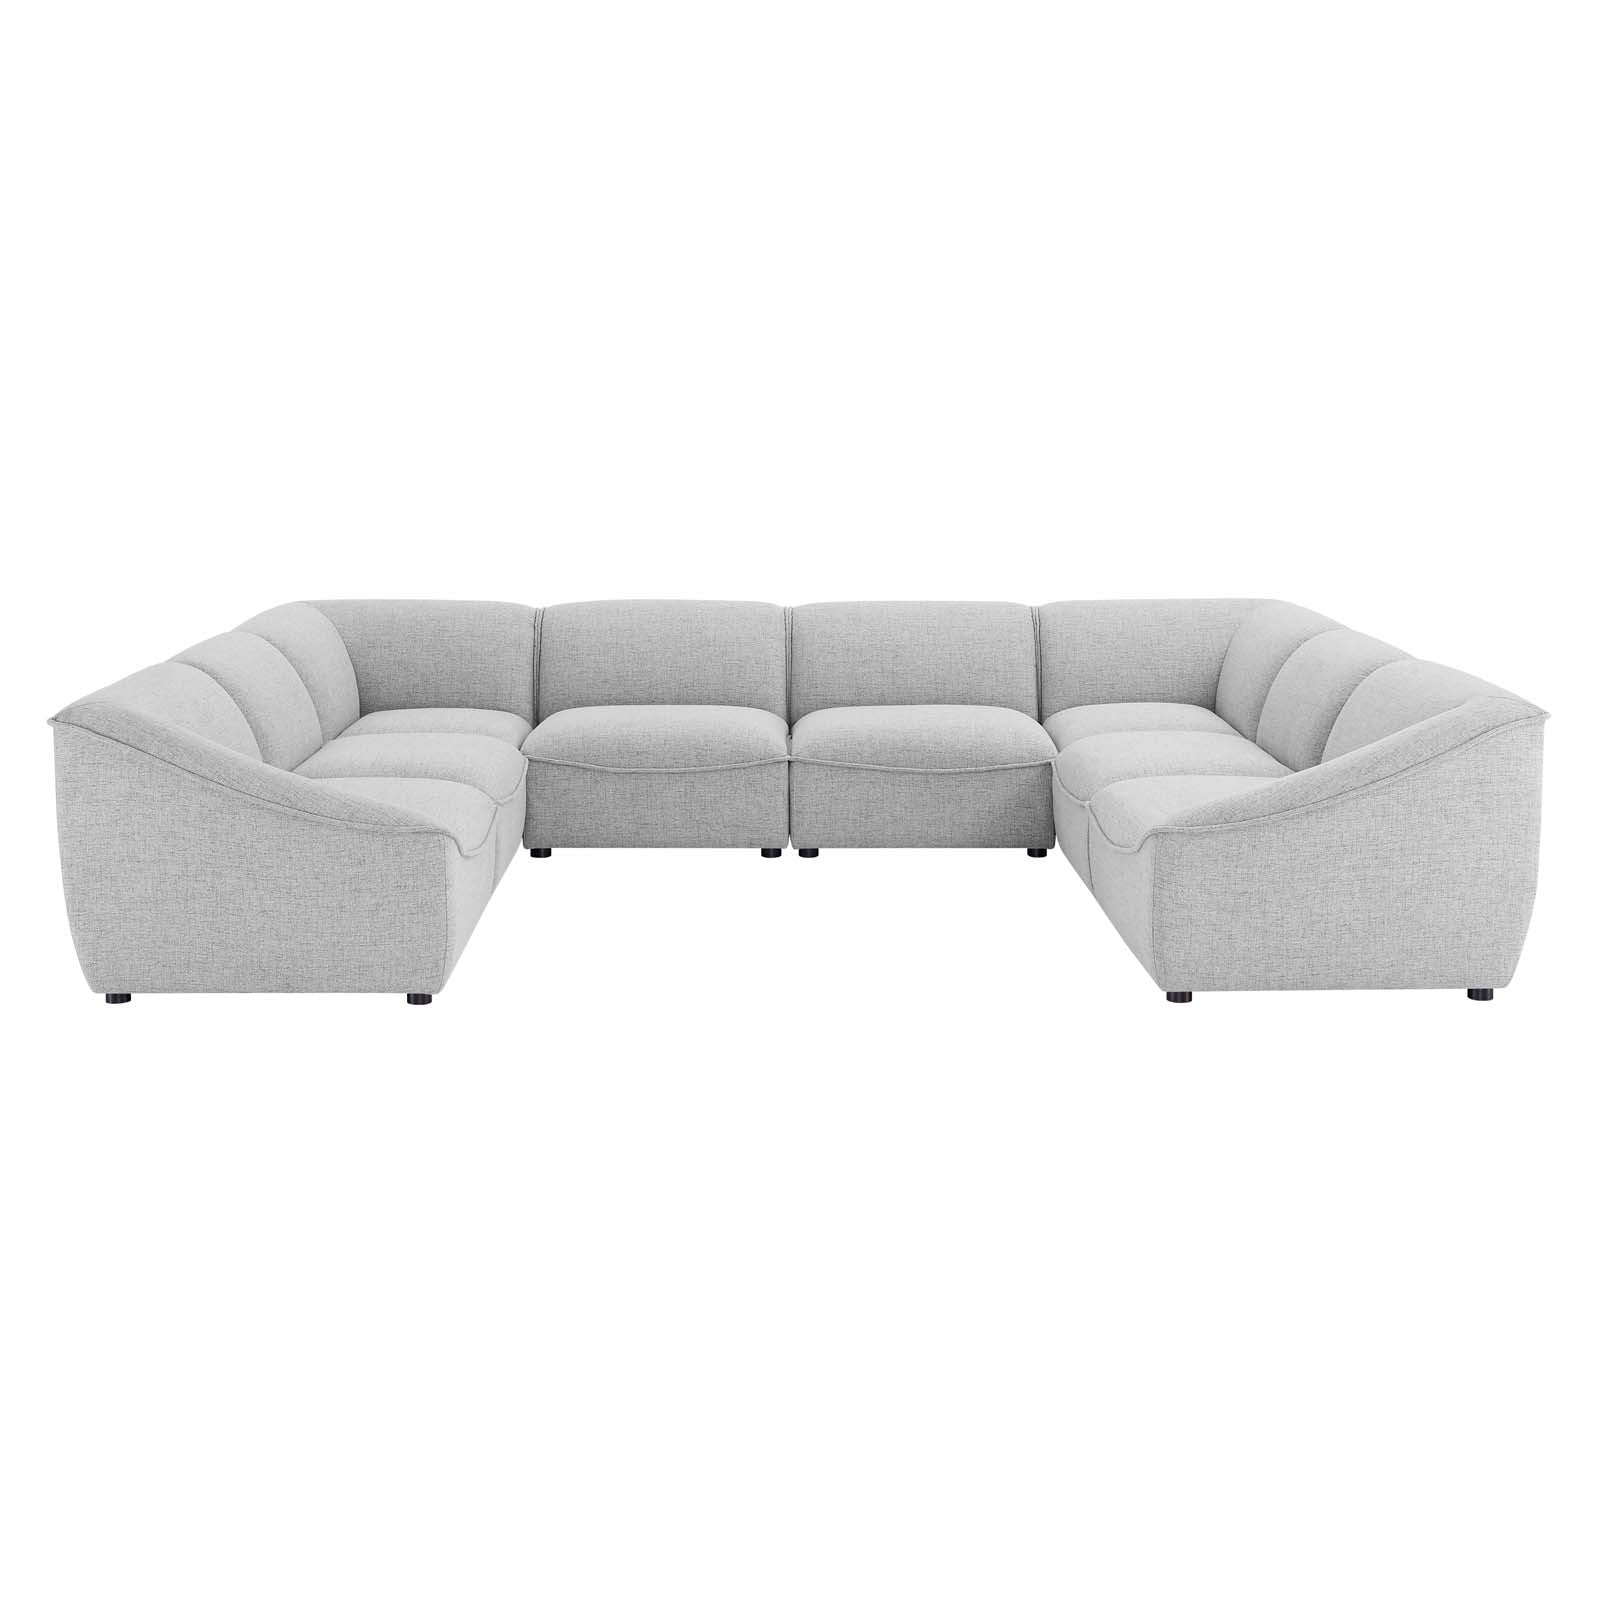 Modway Sectional Sofas - Comprise-8-Piece-Sectional-Sofa-Light-Gray